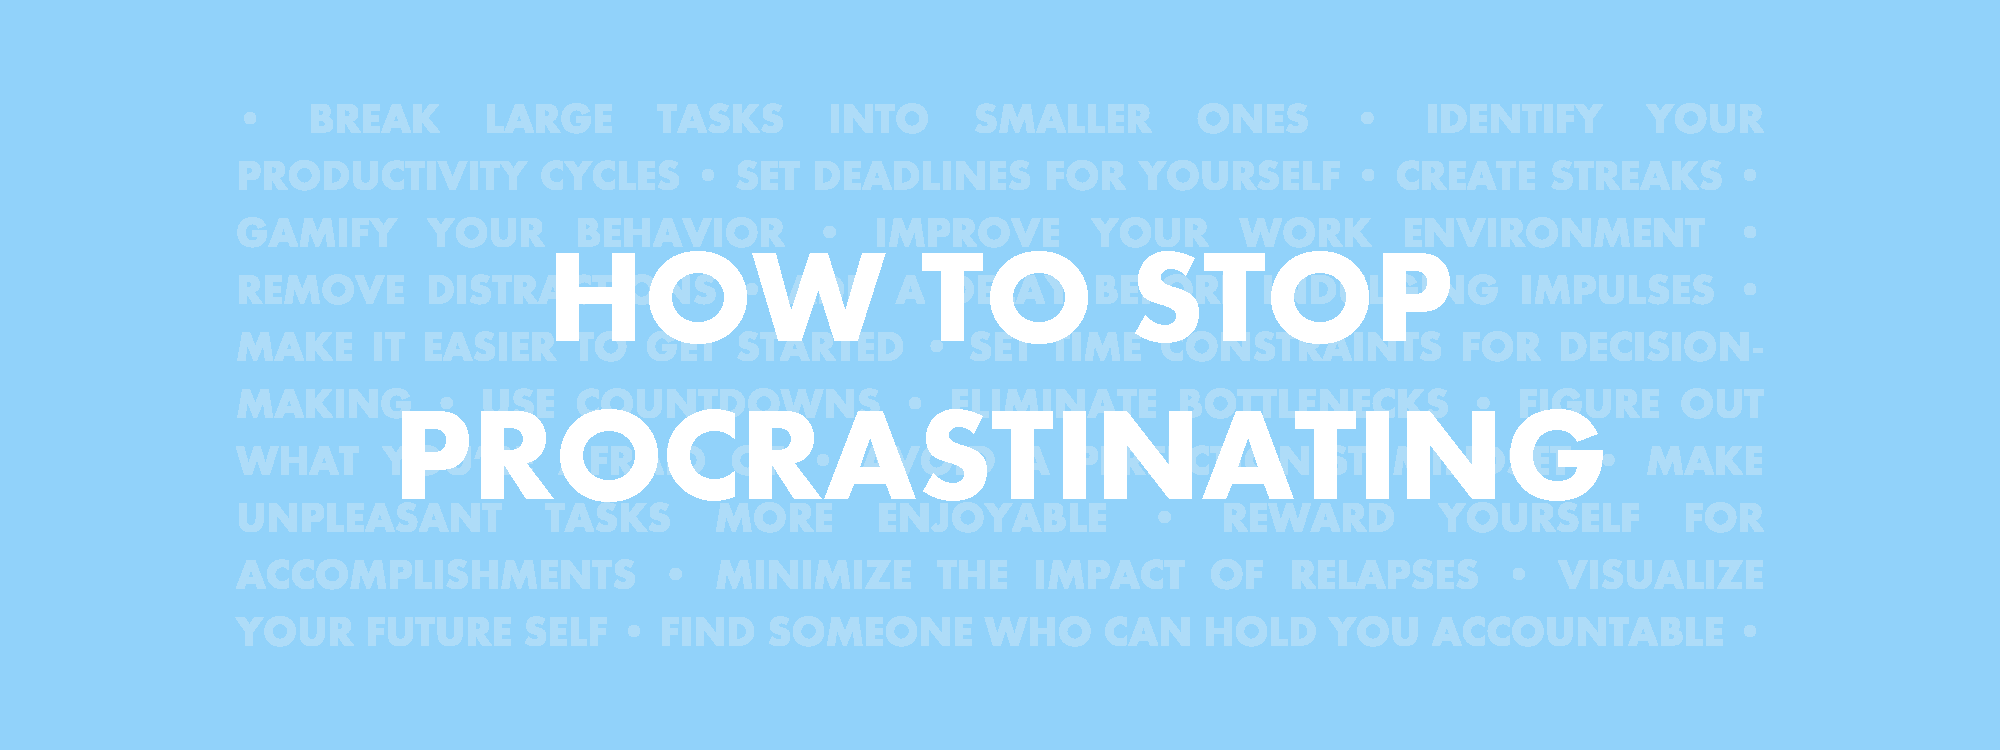 How to Stop Procrastinating: A Guide for People Who Want to Overcome Procrastination and Start Getting Things Done – Solving Procrastination